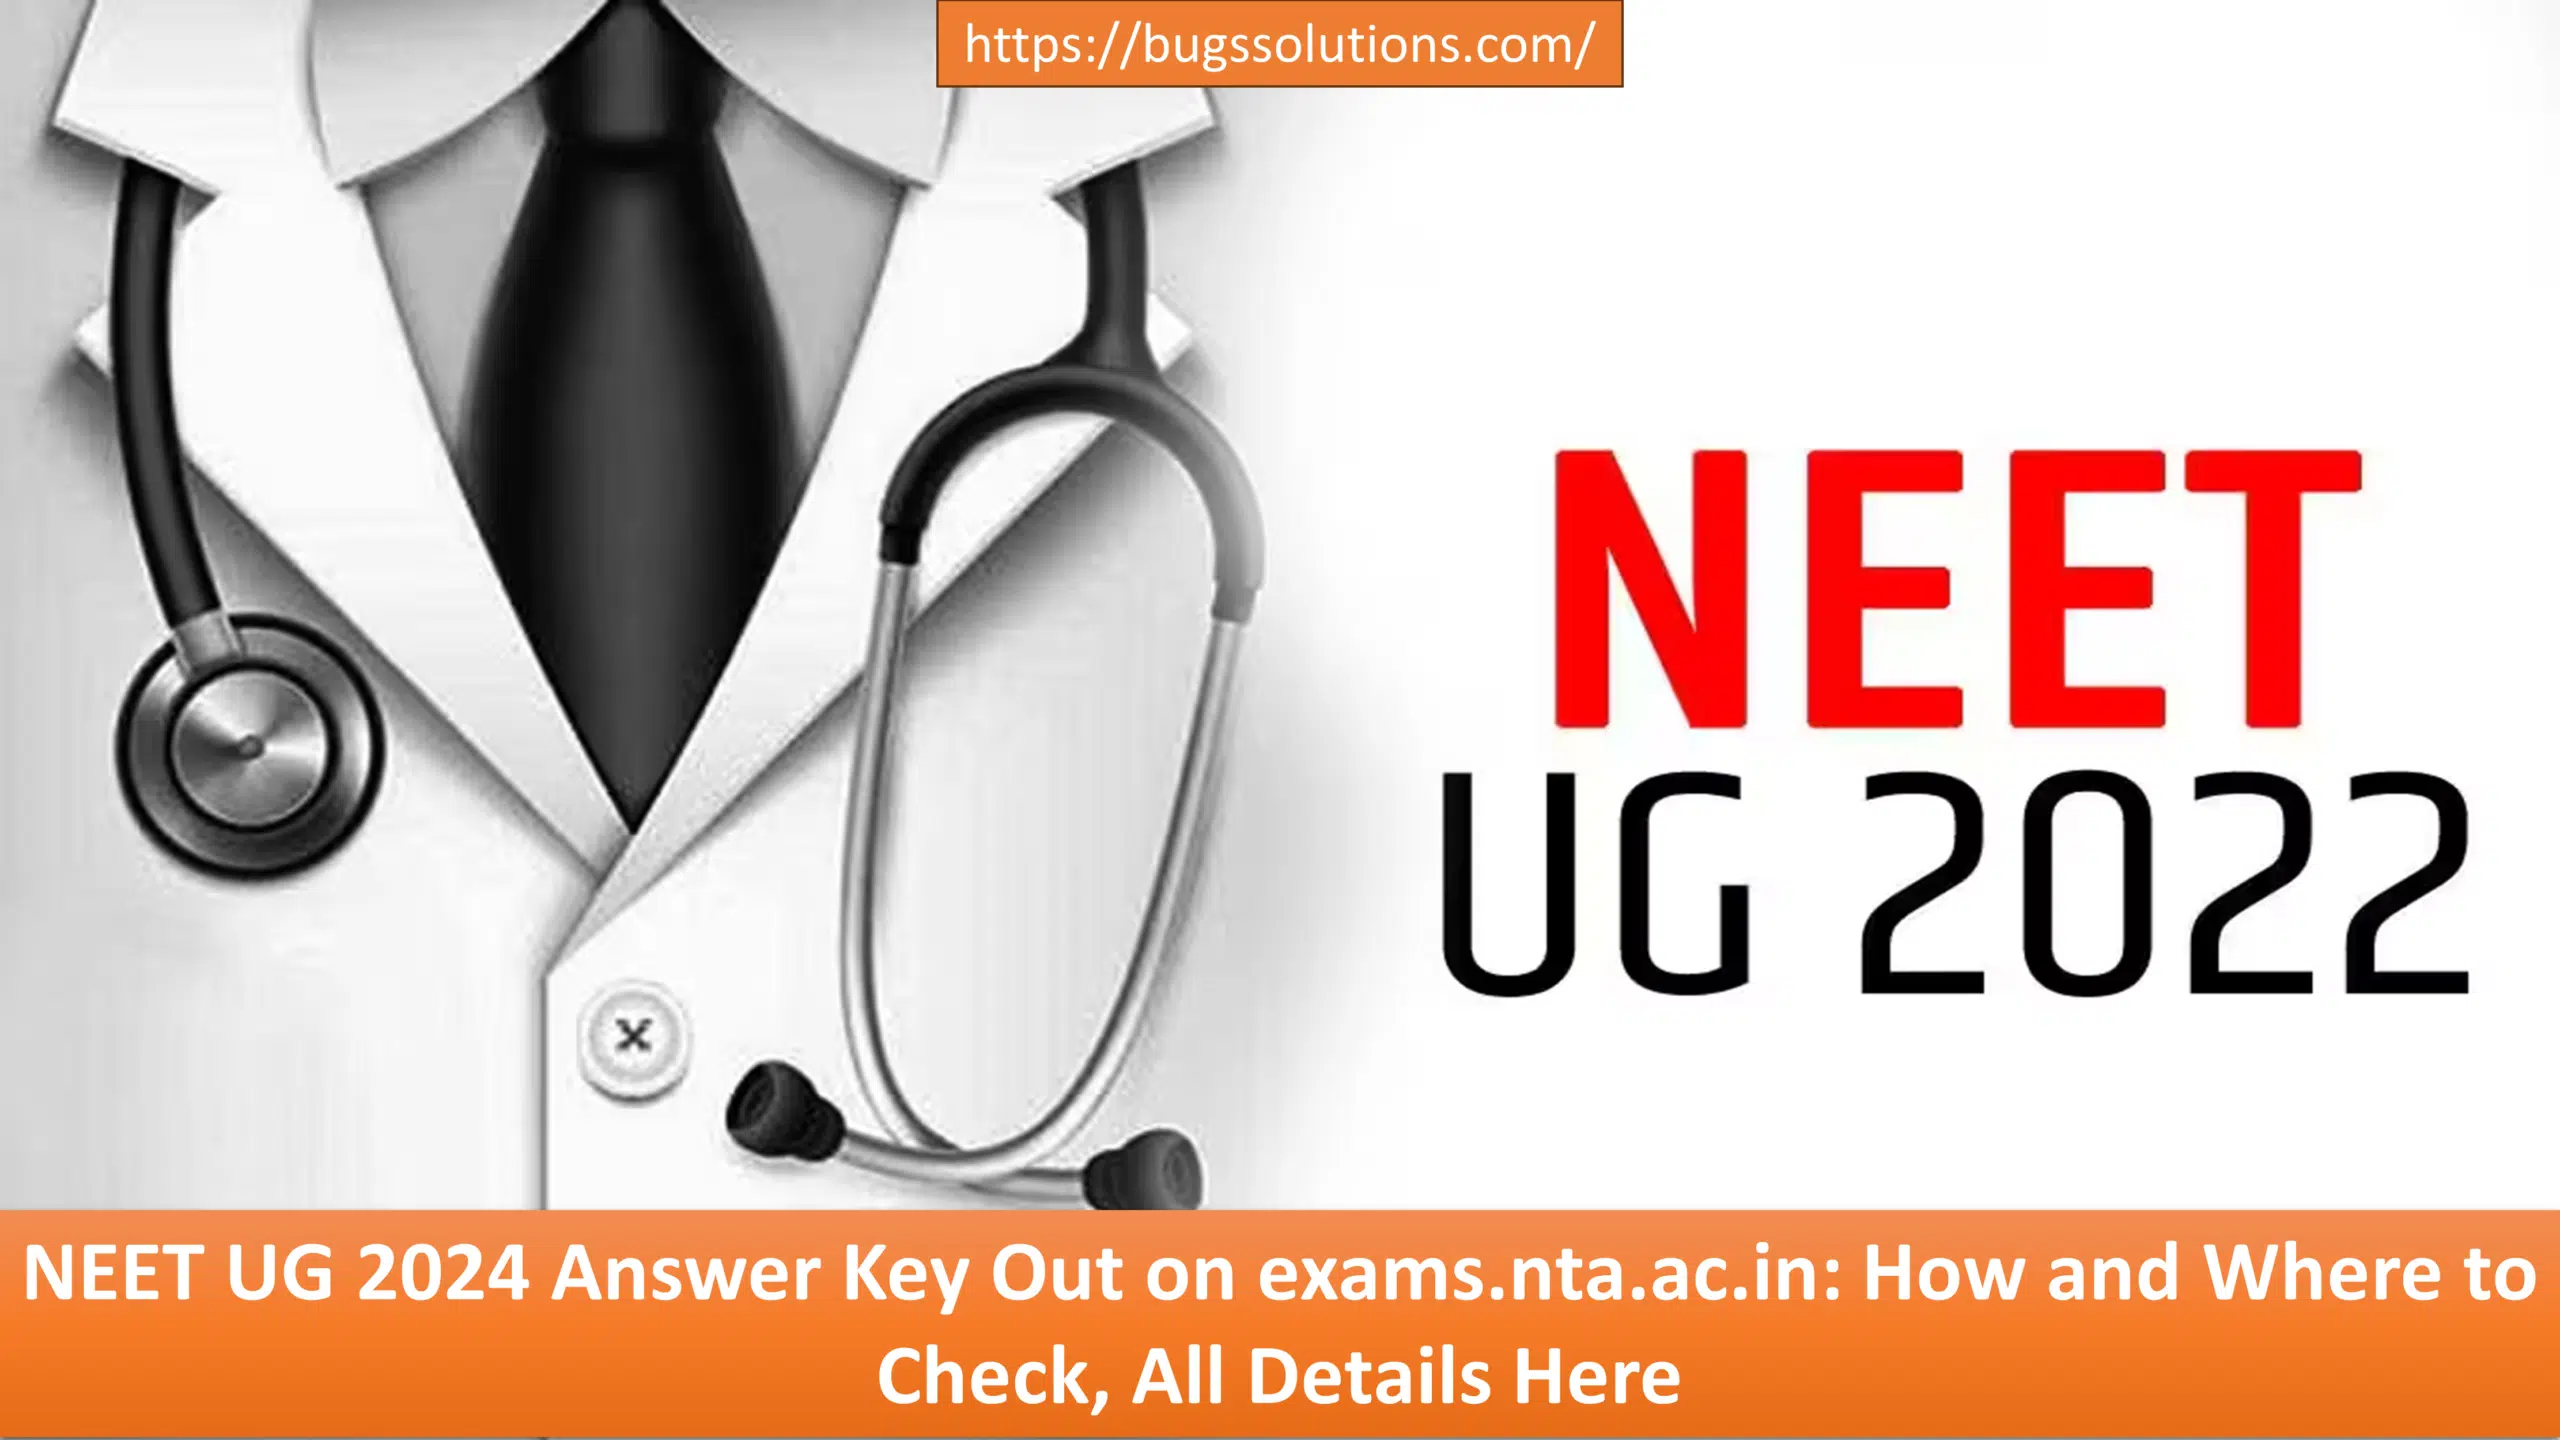 NEET UG 2024 Answer Key Out on exams.nta.ac.in: How and Where to Check, All Details Here